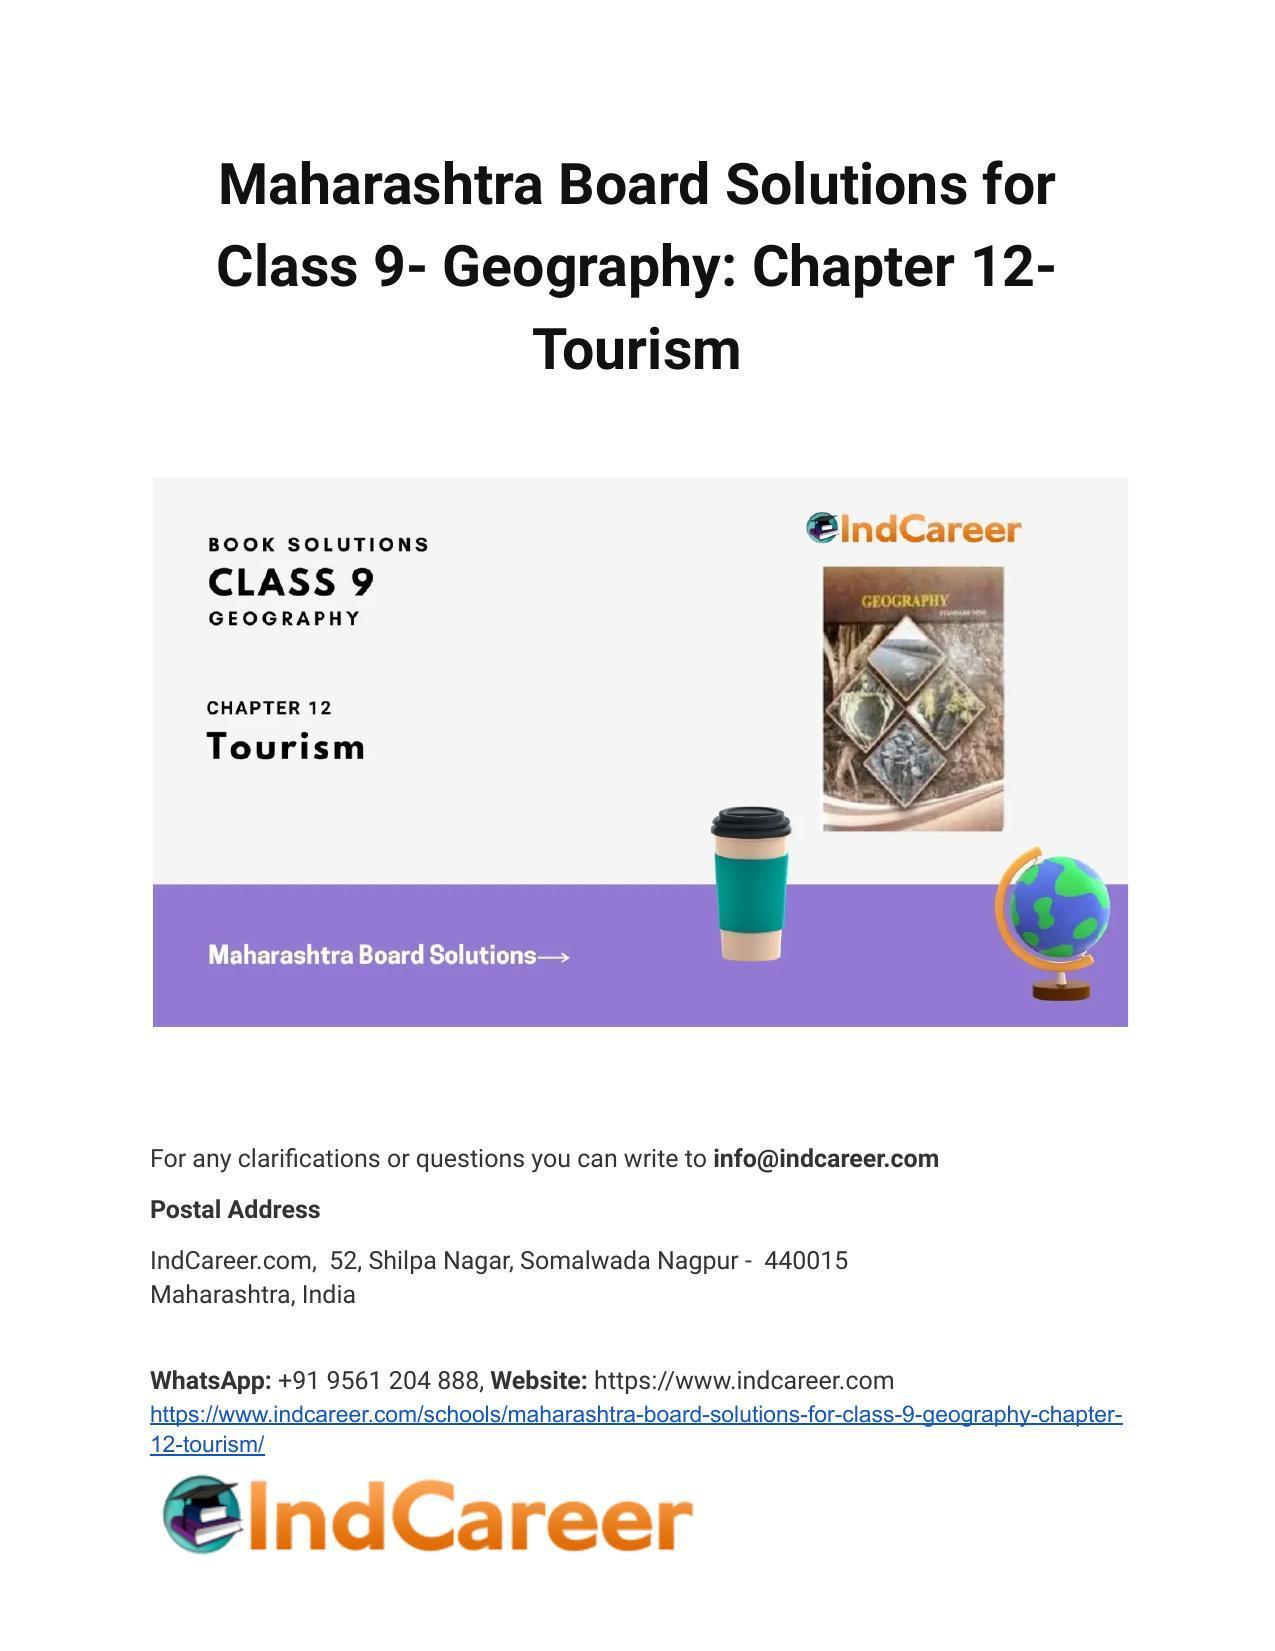 Maharashtra Board Solutions for Class 9- Geography: Chapter 12- Tourism - Page 1